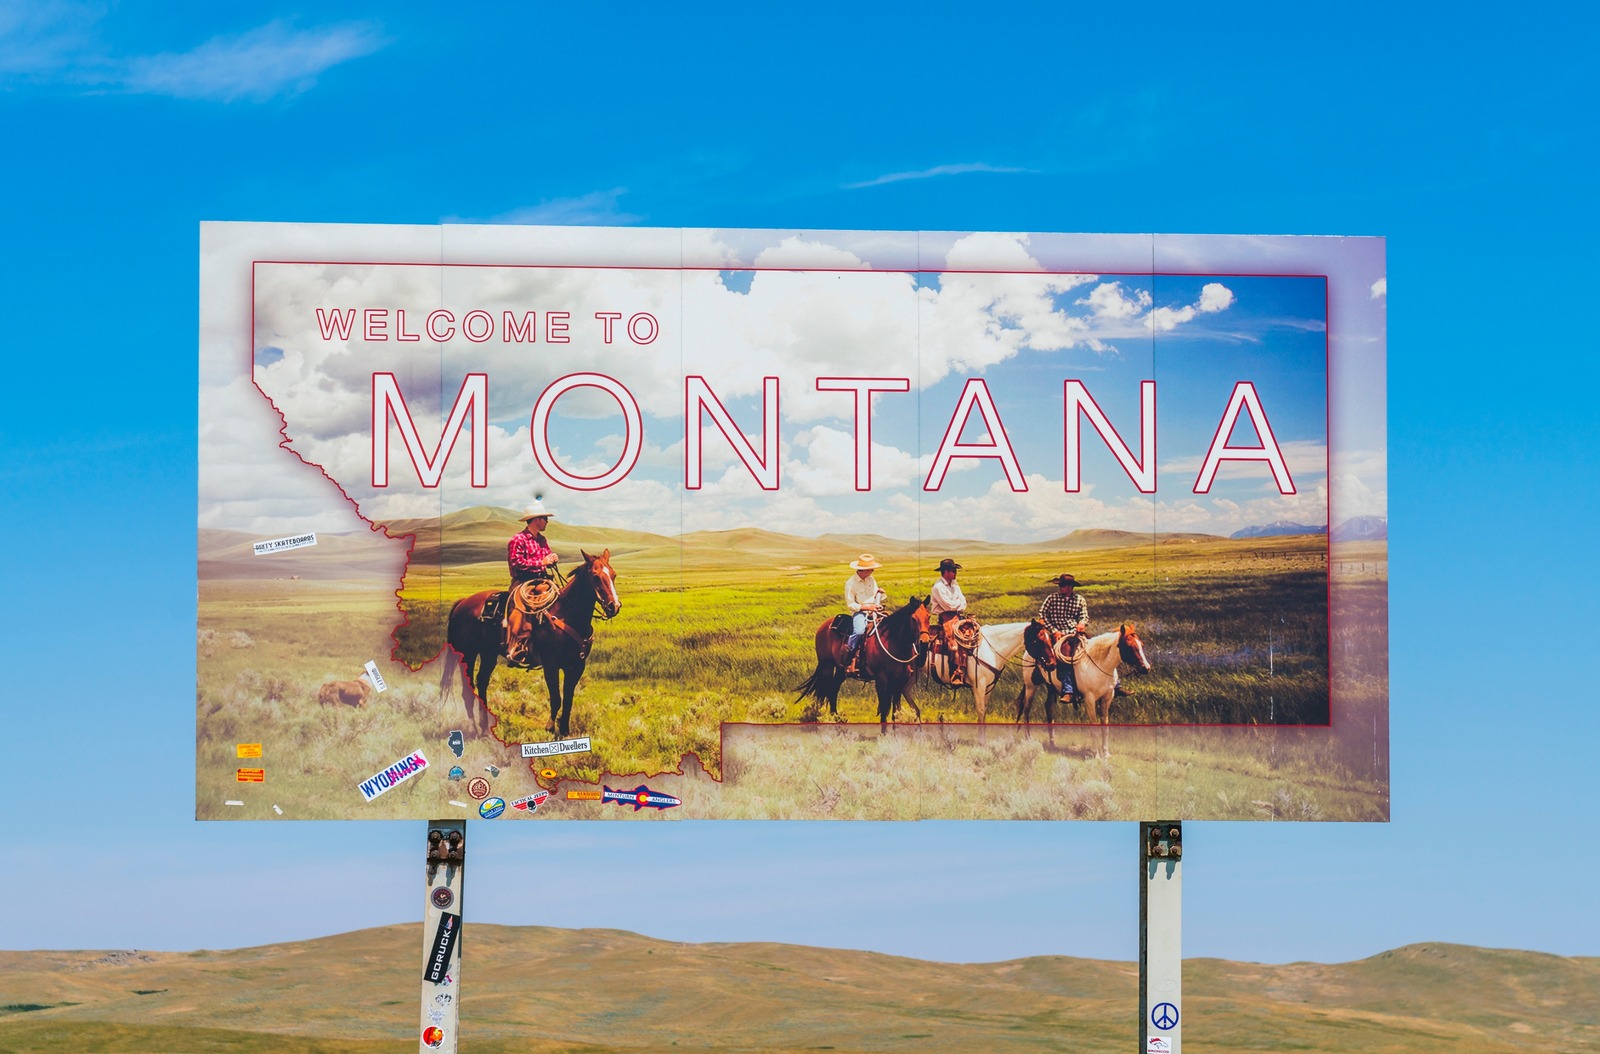 Soon, in some valleys of Greater Yellowstone where ranches are being replaced by subdivisions, will cowboys only appear on billboards promoting tourism? Photo courtesy Shutterstock ID 1219929058/Checubus 